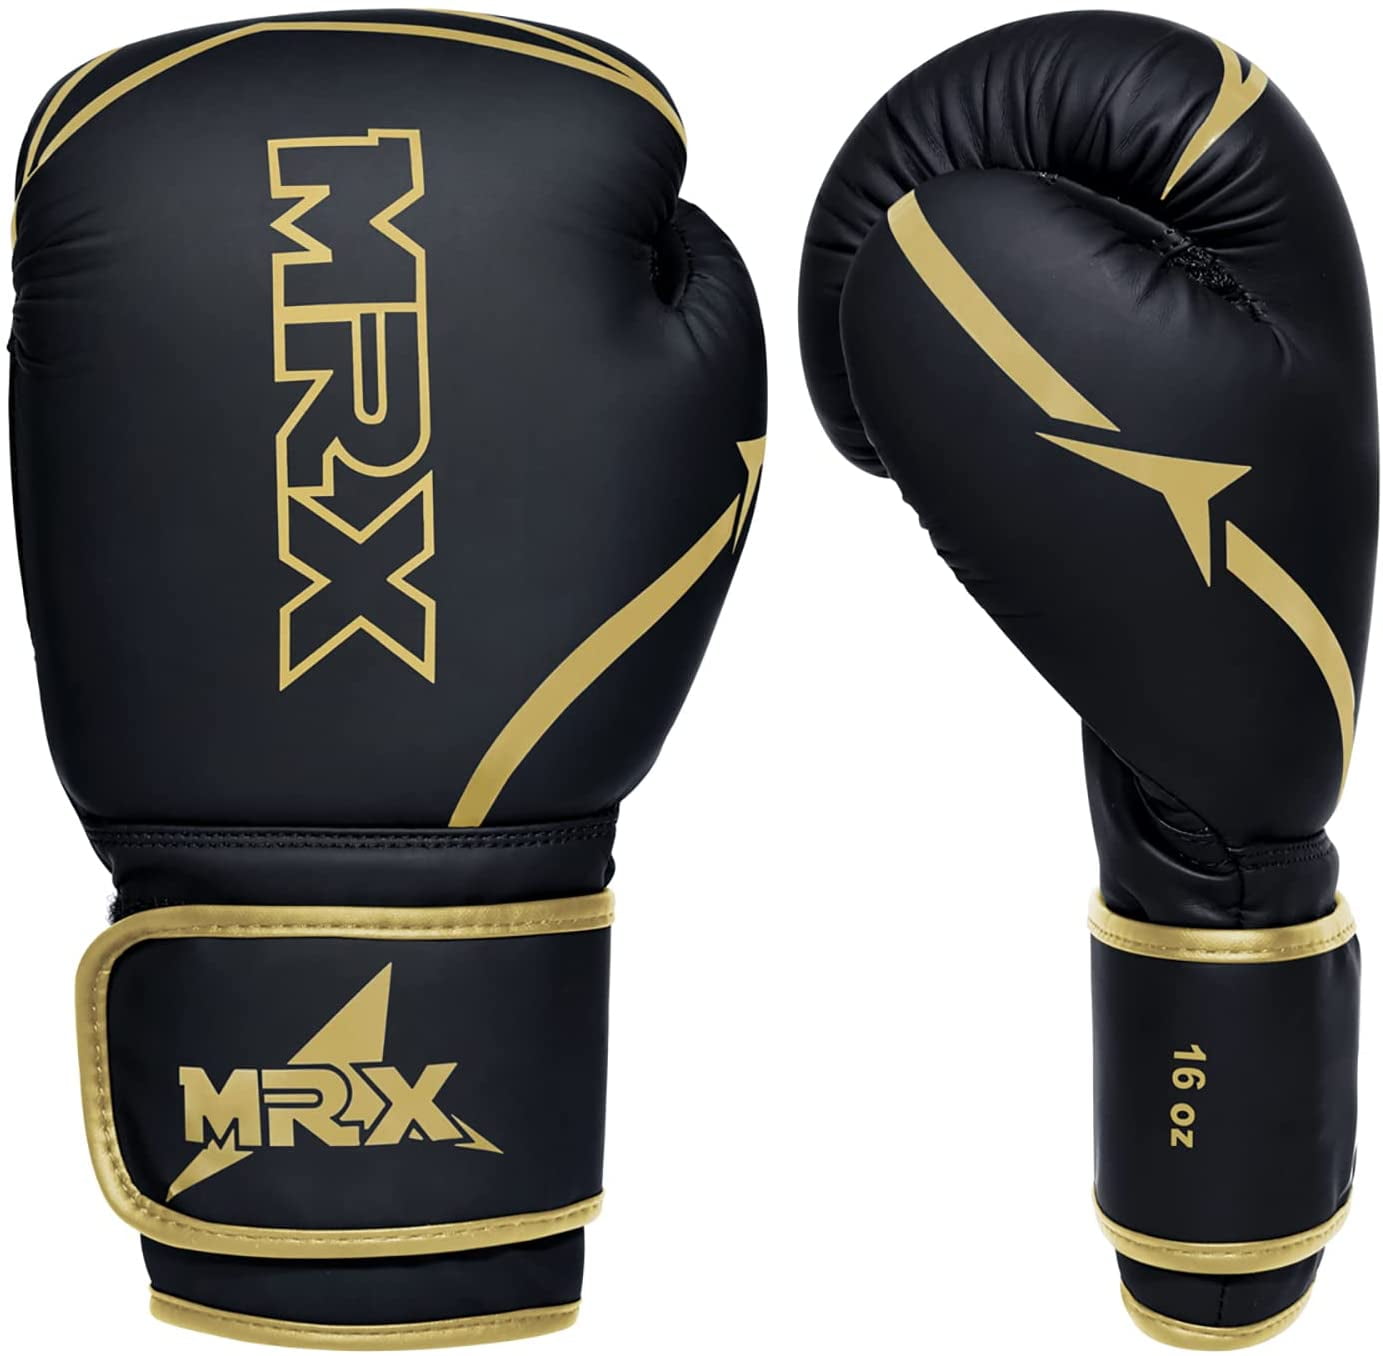 MMA Boxing Gloves Grappling Punching Bag Training Kickboxing Sparring Fight 